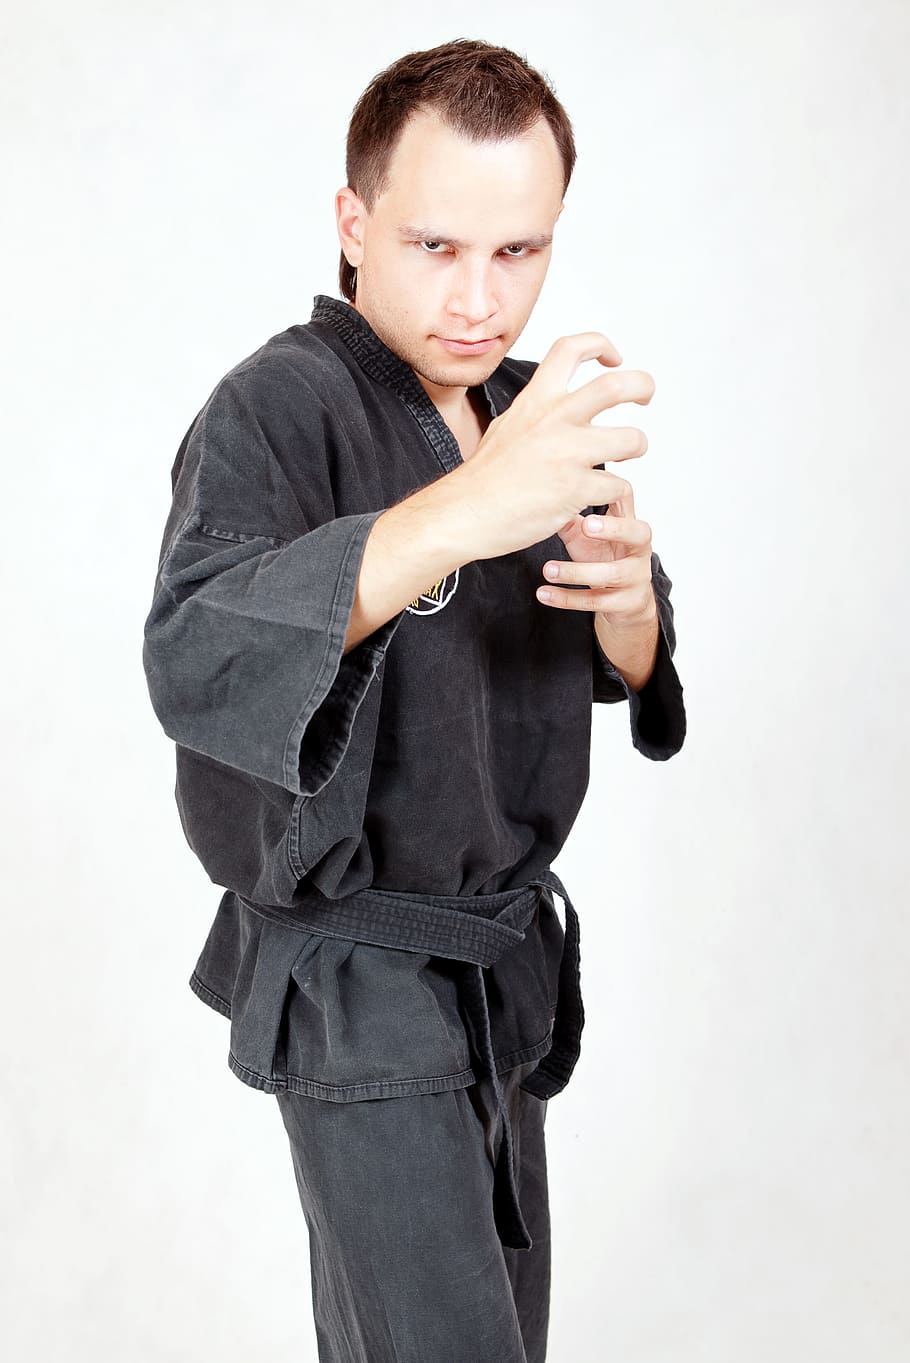 con2011, fight, fighter, health, hobby, karate, kungfu, lifestyle, male, man